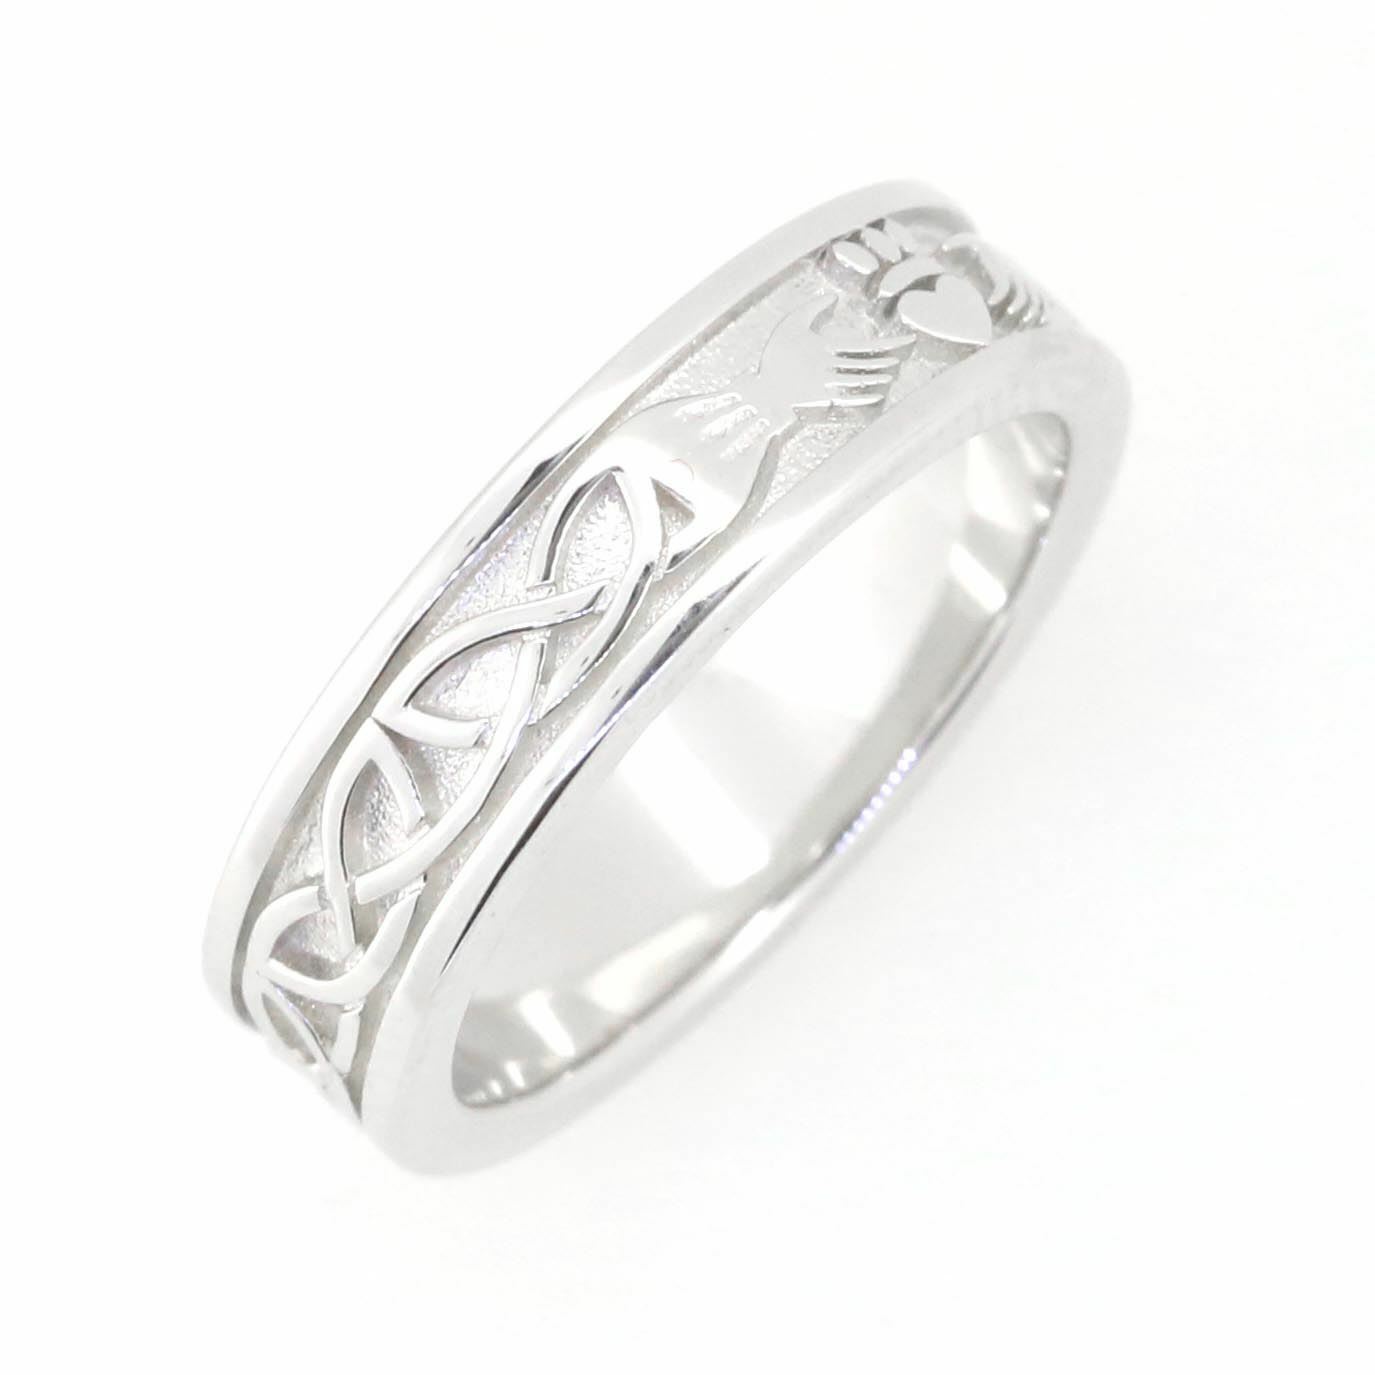 14K White Gold 5 mm Claddagh Band Celtic Knot Ring